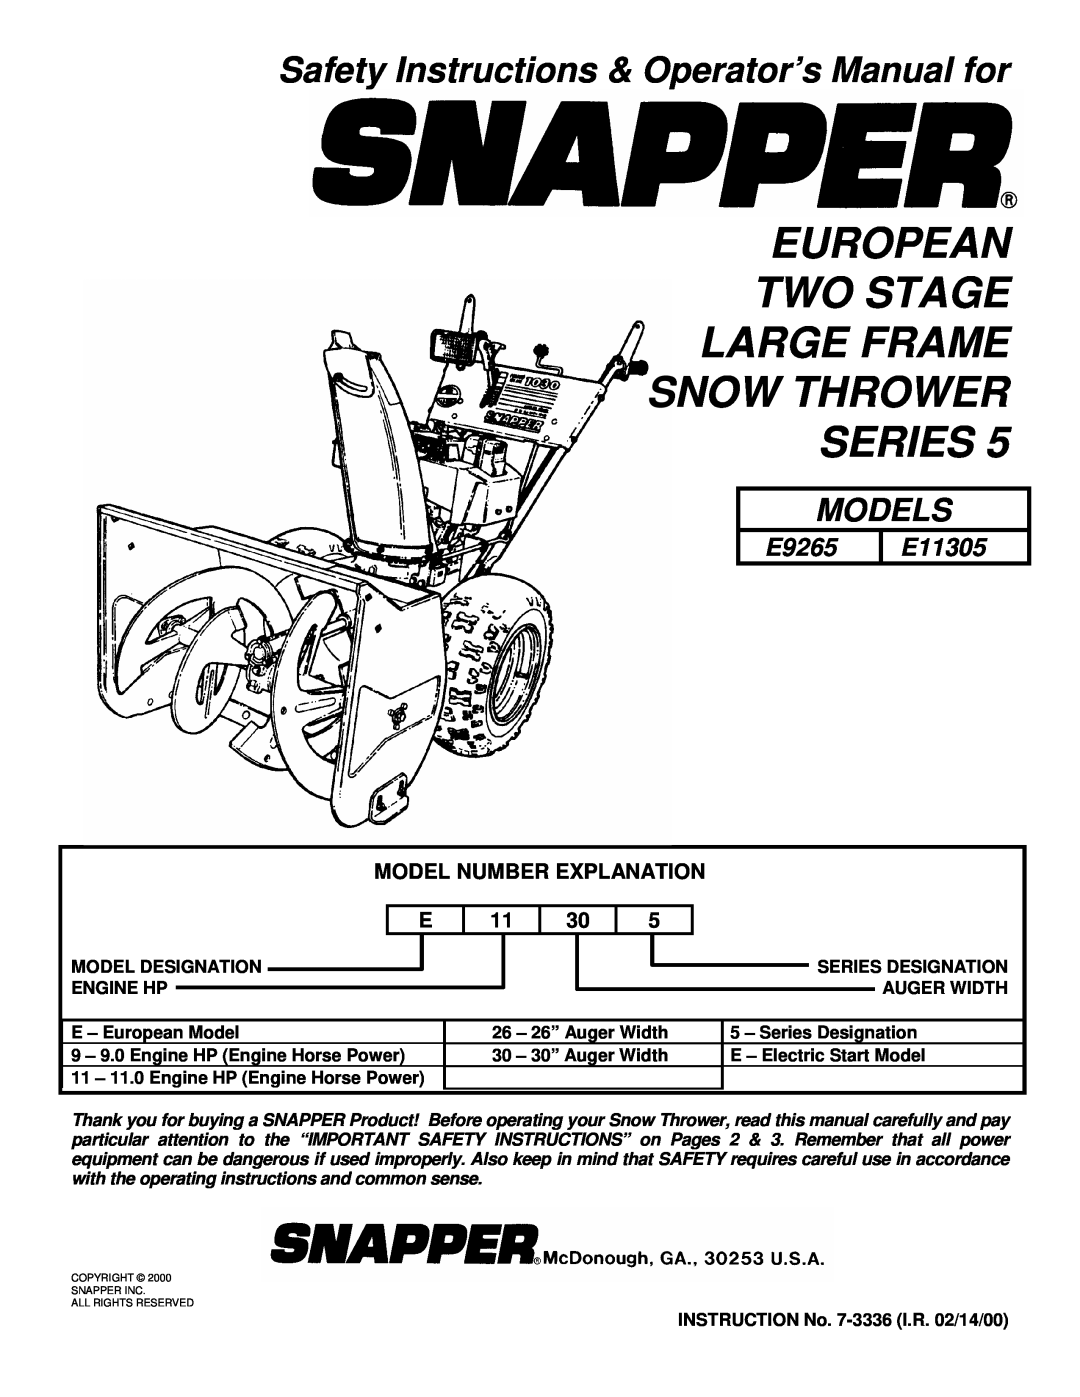 Snapper E11305 important safety instructions Safety Instructions & Operator’s Manual for, Models, Series, E9265 